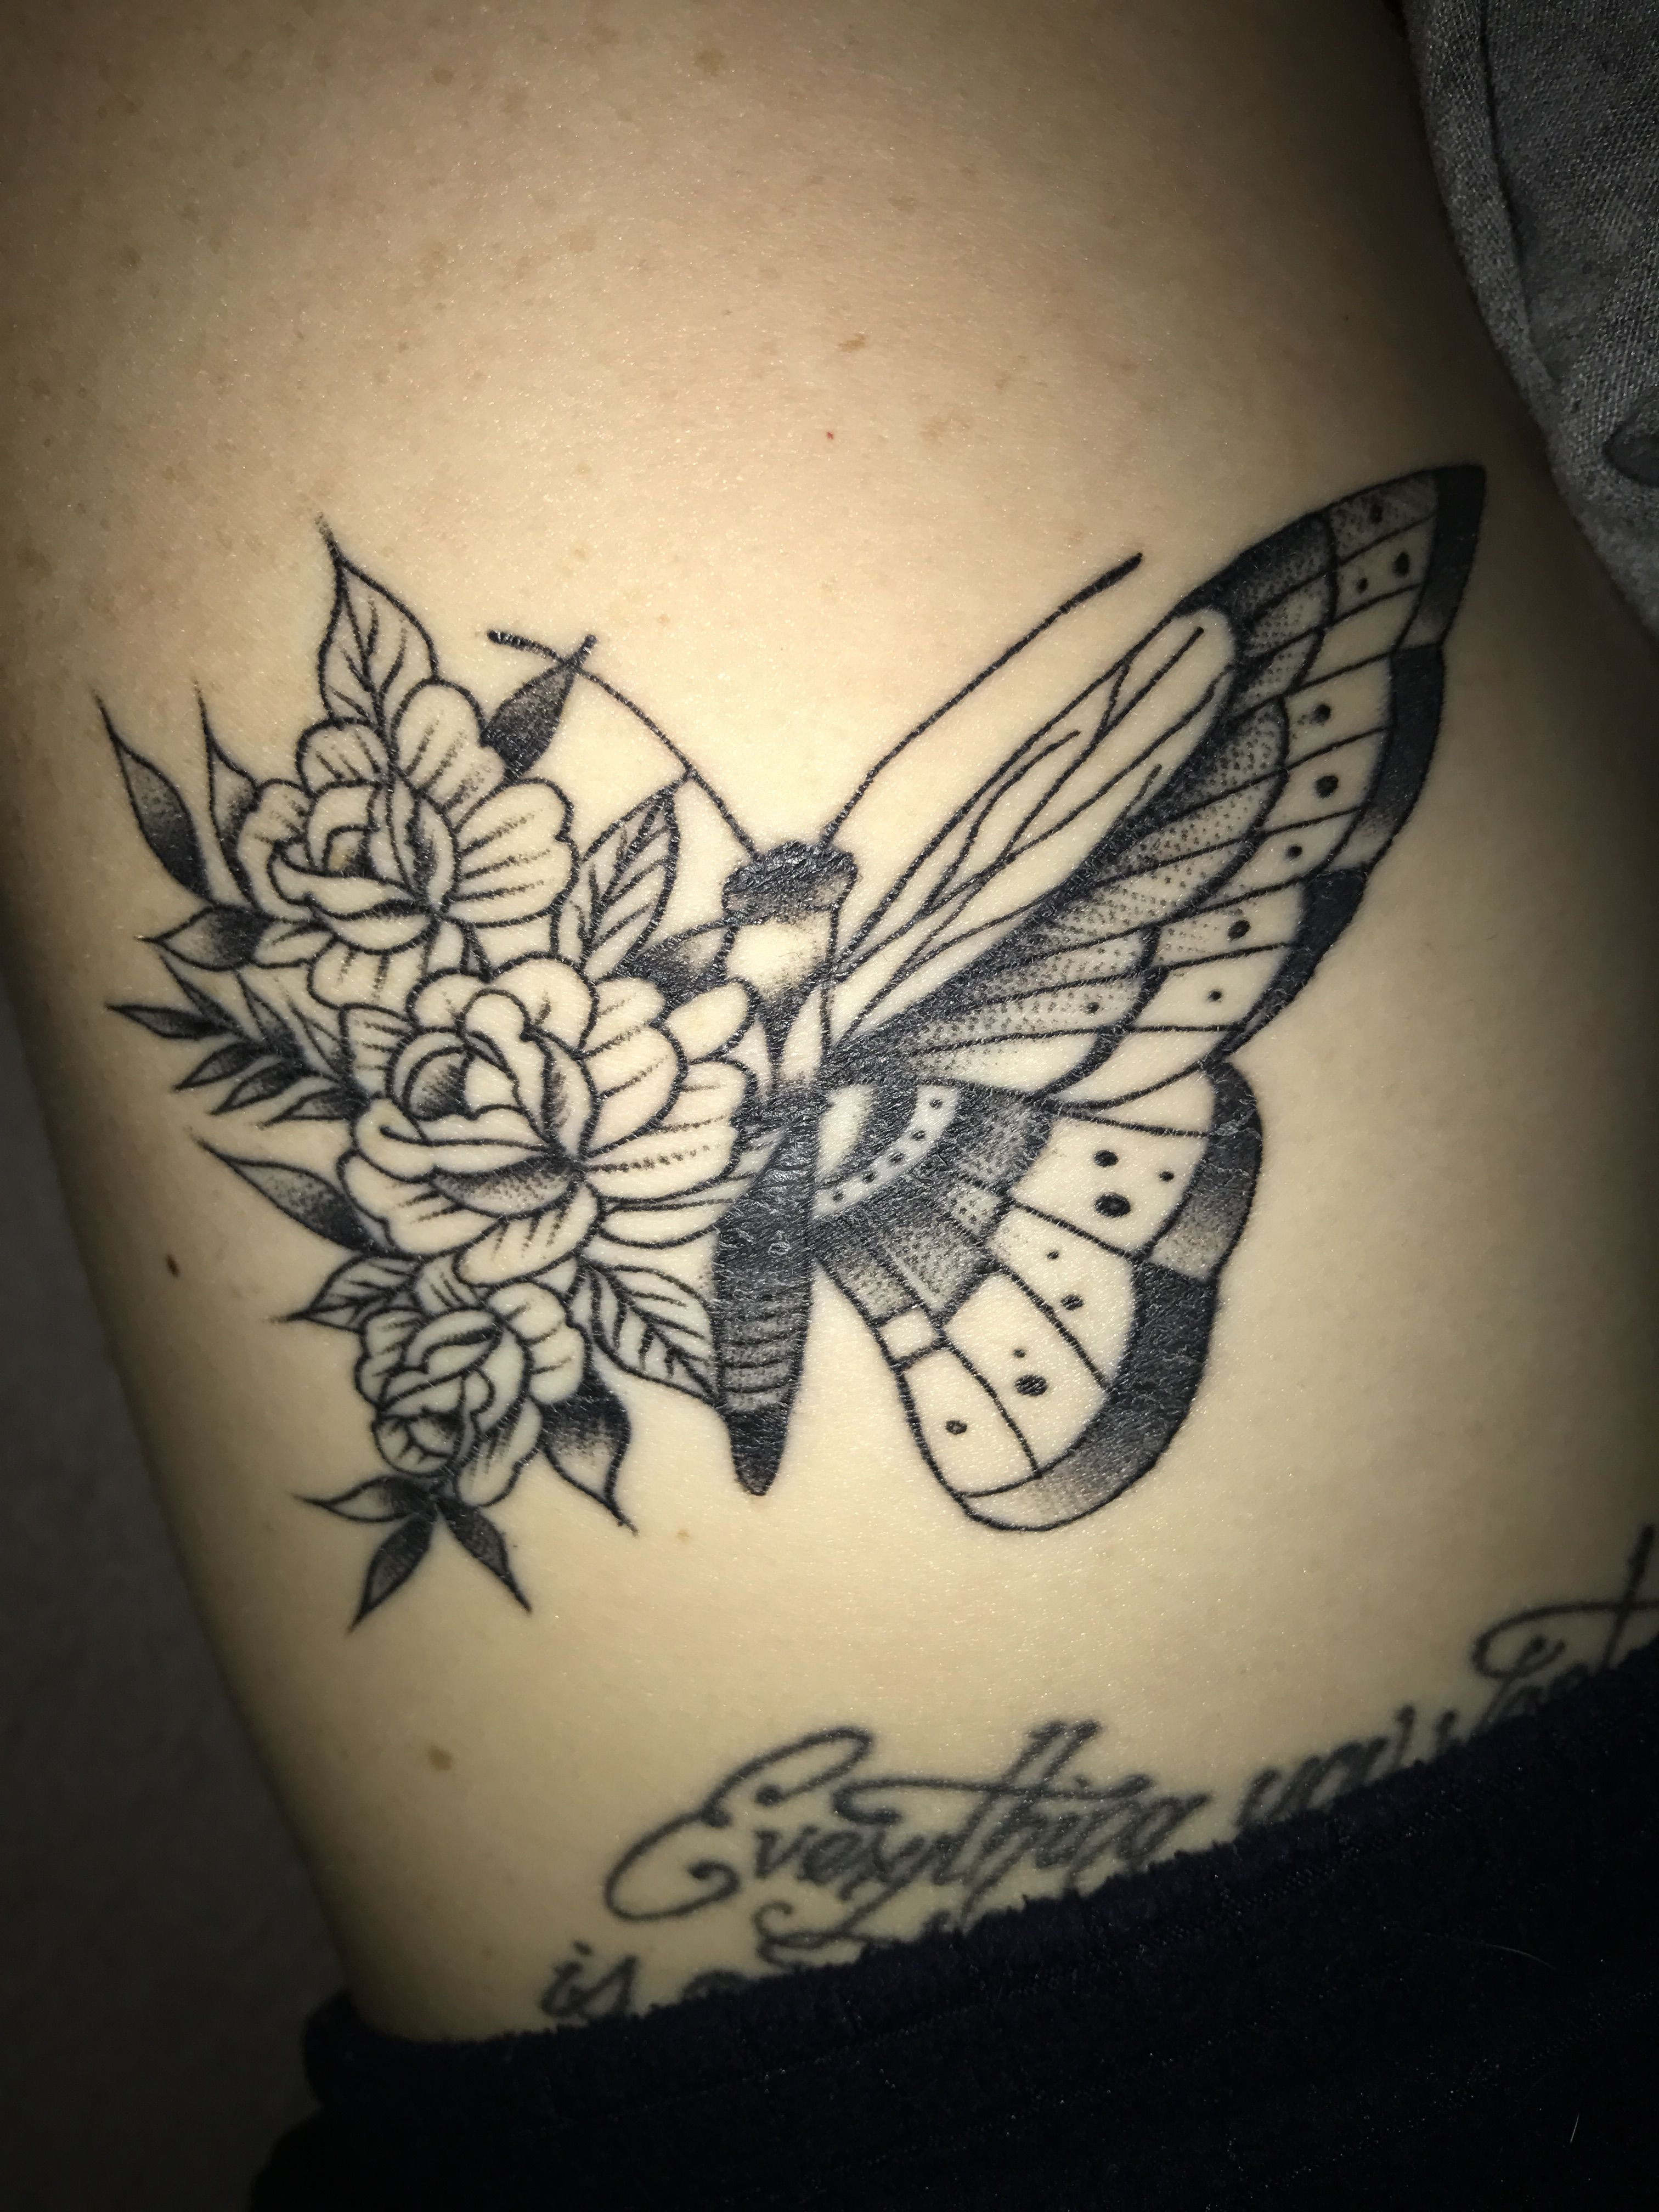 Butterfly Tattoo With Flower Wing Tattoos Tattoos Flowers Drawings inside dimensions 3024 X 4032